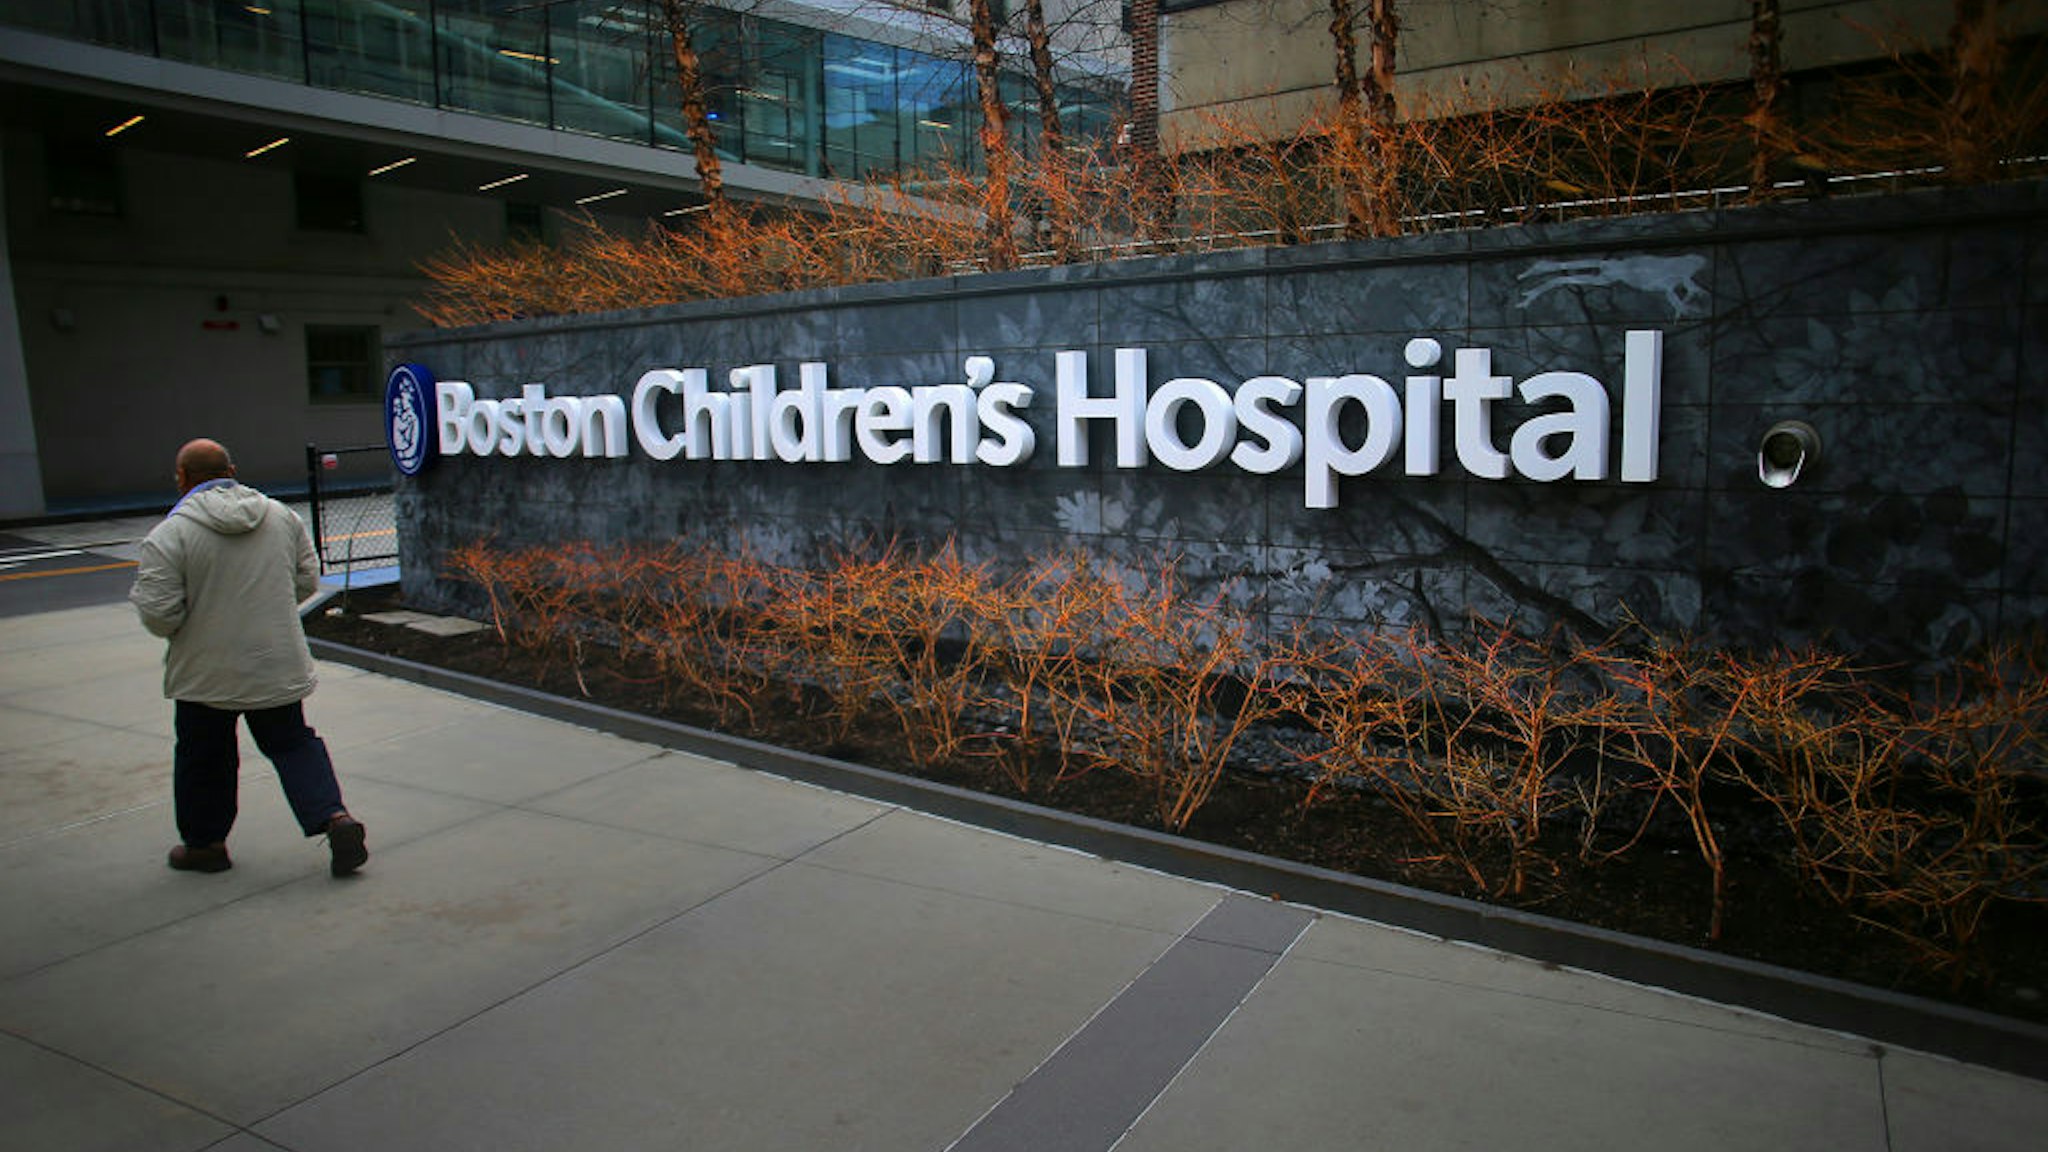 Boston, MA - February 26: A pedestrian passes the Longwood Avenue exterior of the Boston Children's Hospital on February 26, 2020. (Photo by Lane Turner/The Boston Globe via Getty Images)